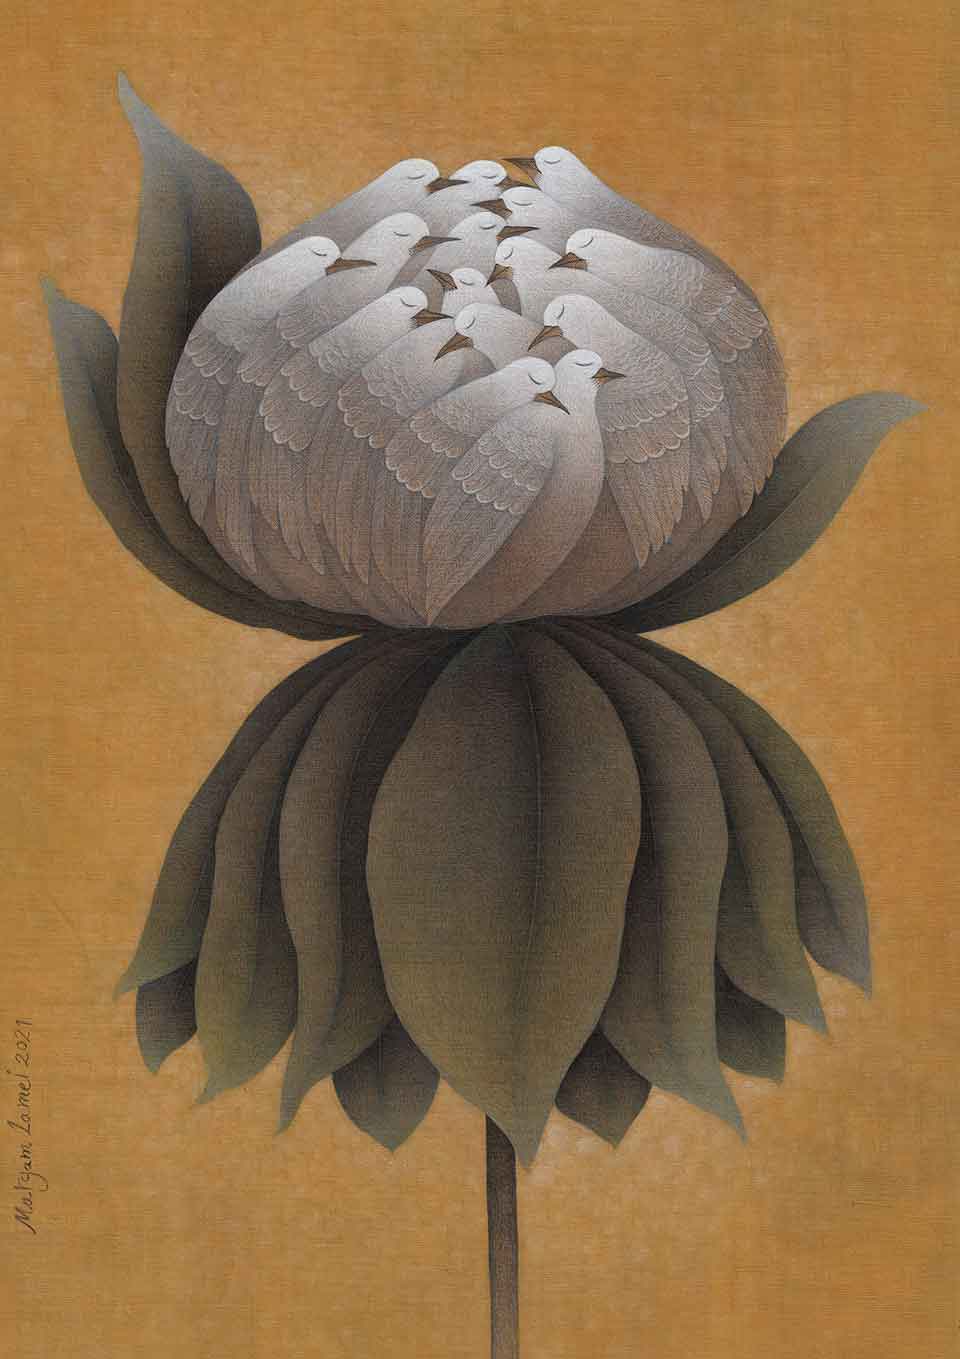 A painting of a flower against a seipa background